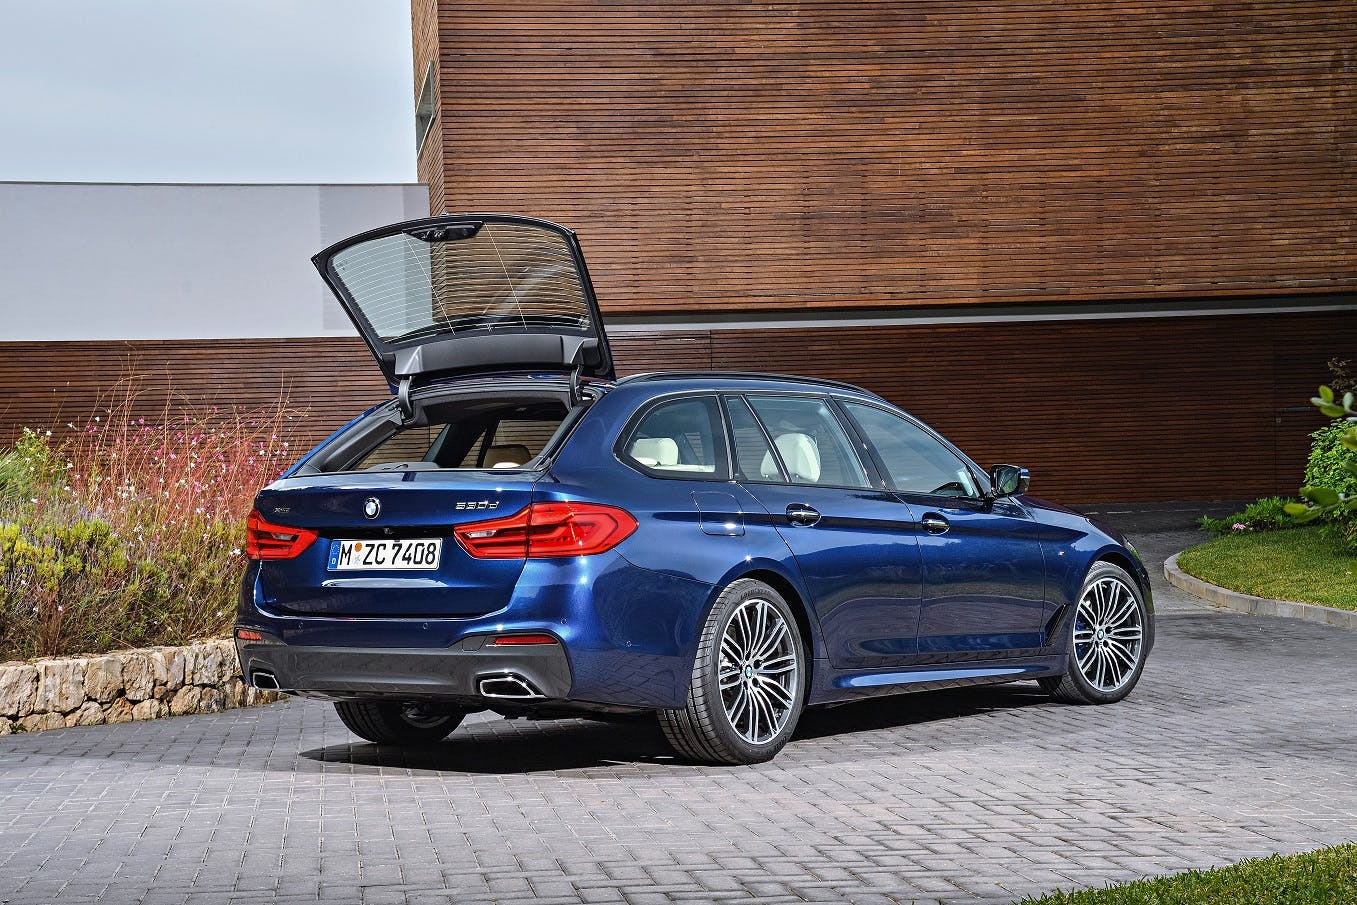 https://images.prismic.io/shacarlacca%2F6a2ba25c-3df1-40fc-ba96-10b4f783a55b_p90244997_highres_the-new-bmw-5-series.jpg?auto=compress,format&rect=0,0,1357,905&w=1357&h=905